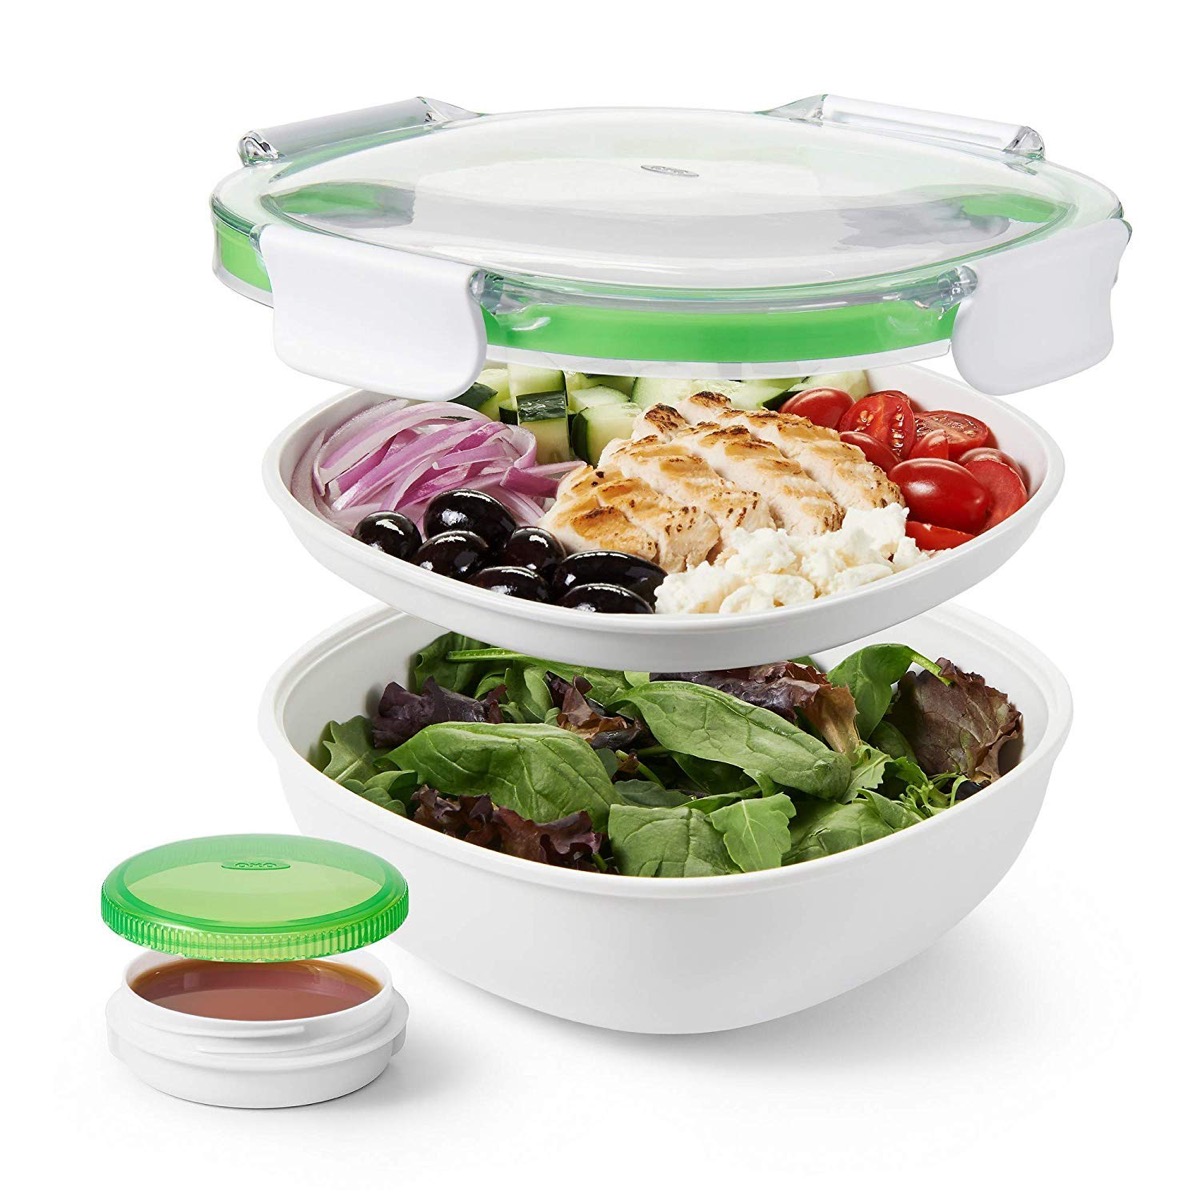 three lunch bowls with green lid